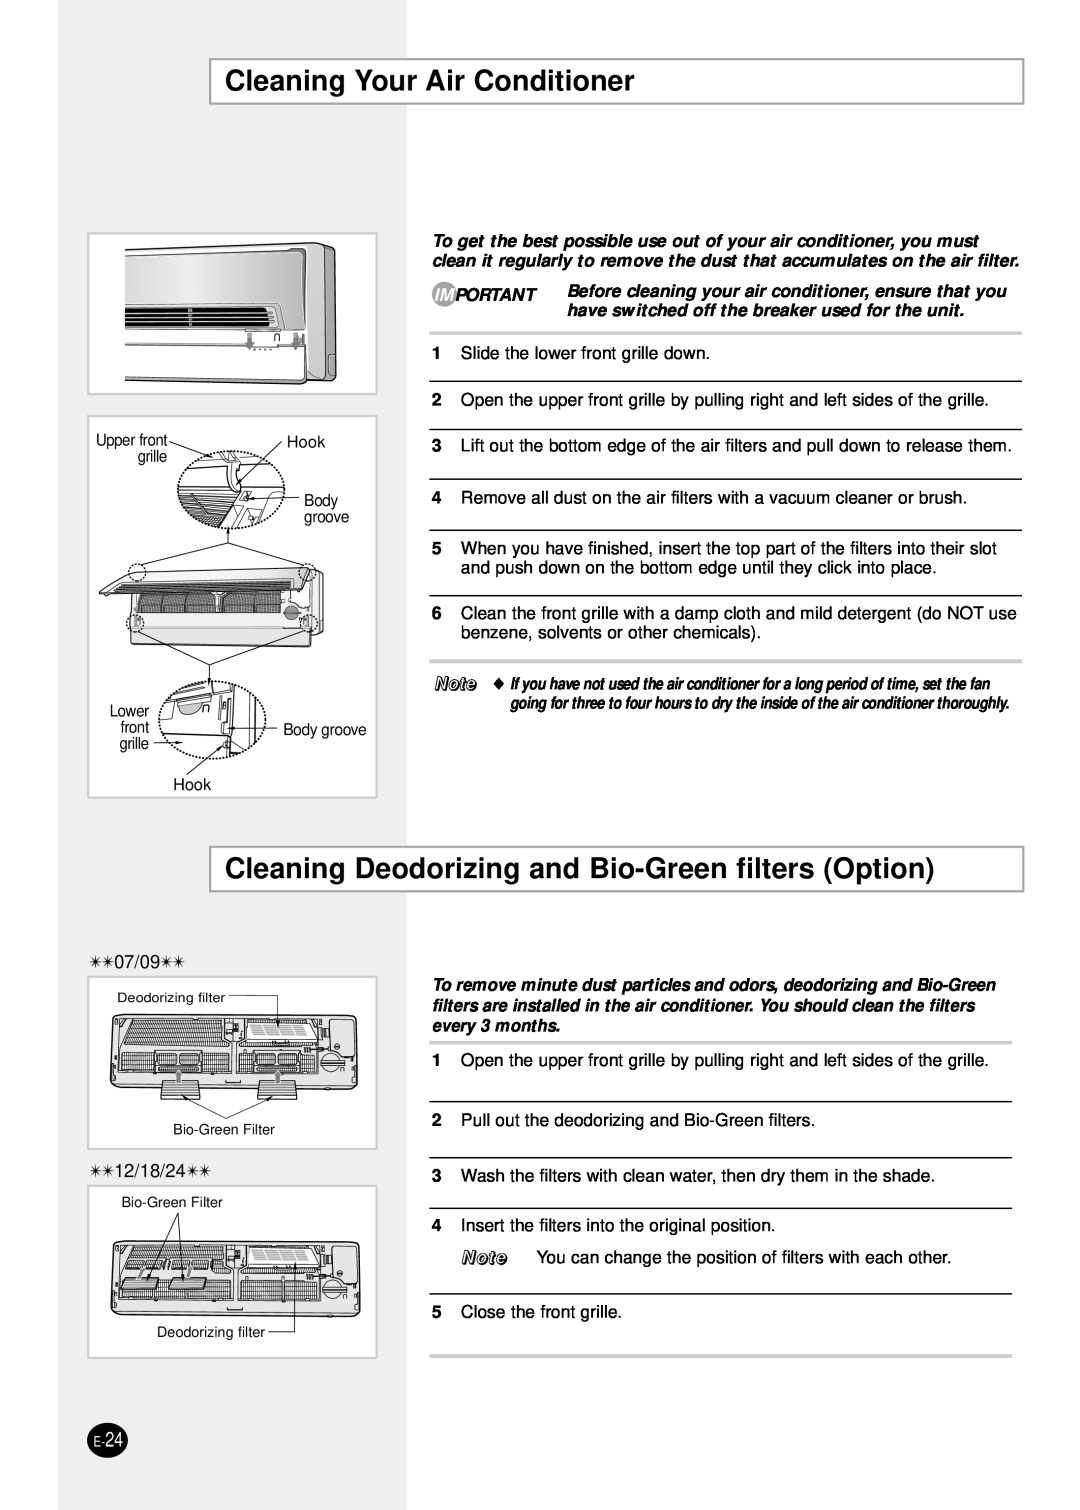 Samsung SH18ZS0 manual Cleaning Your Air Conditioner, Cleaning Deodorizing and Bio-Green filters Option, 07/09, 12/18/24 